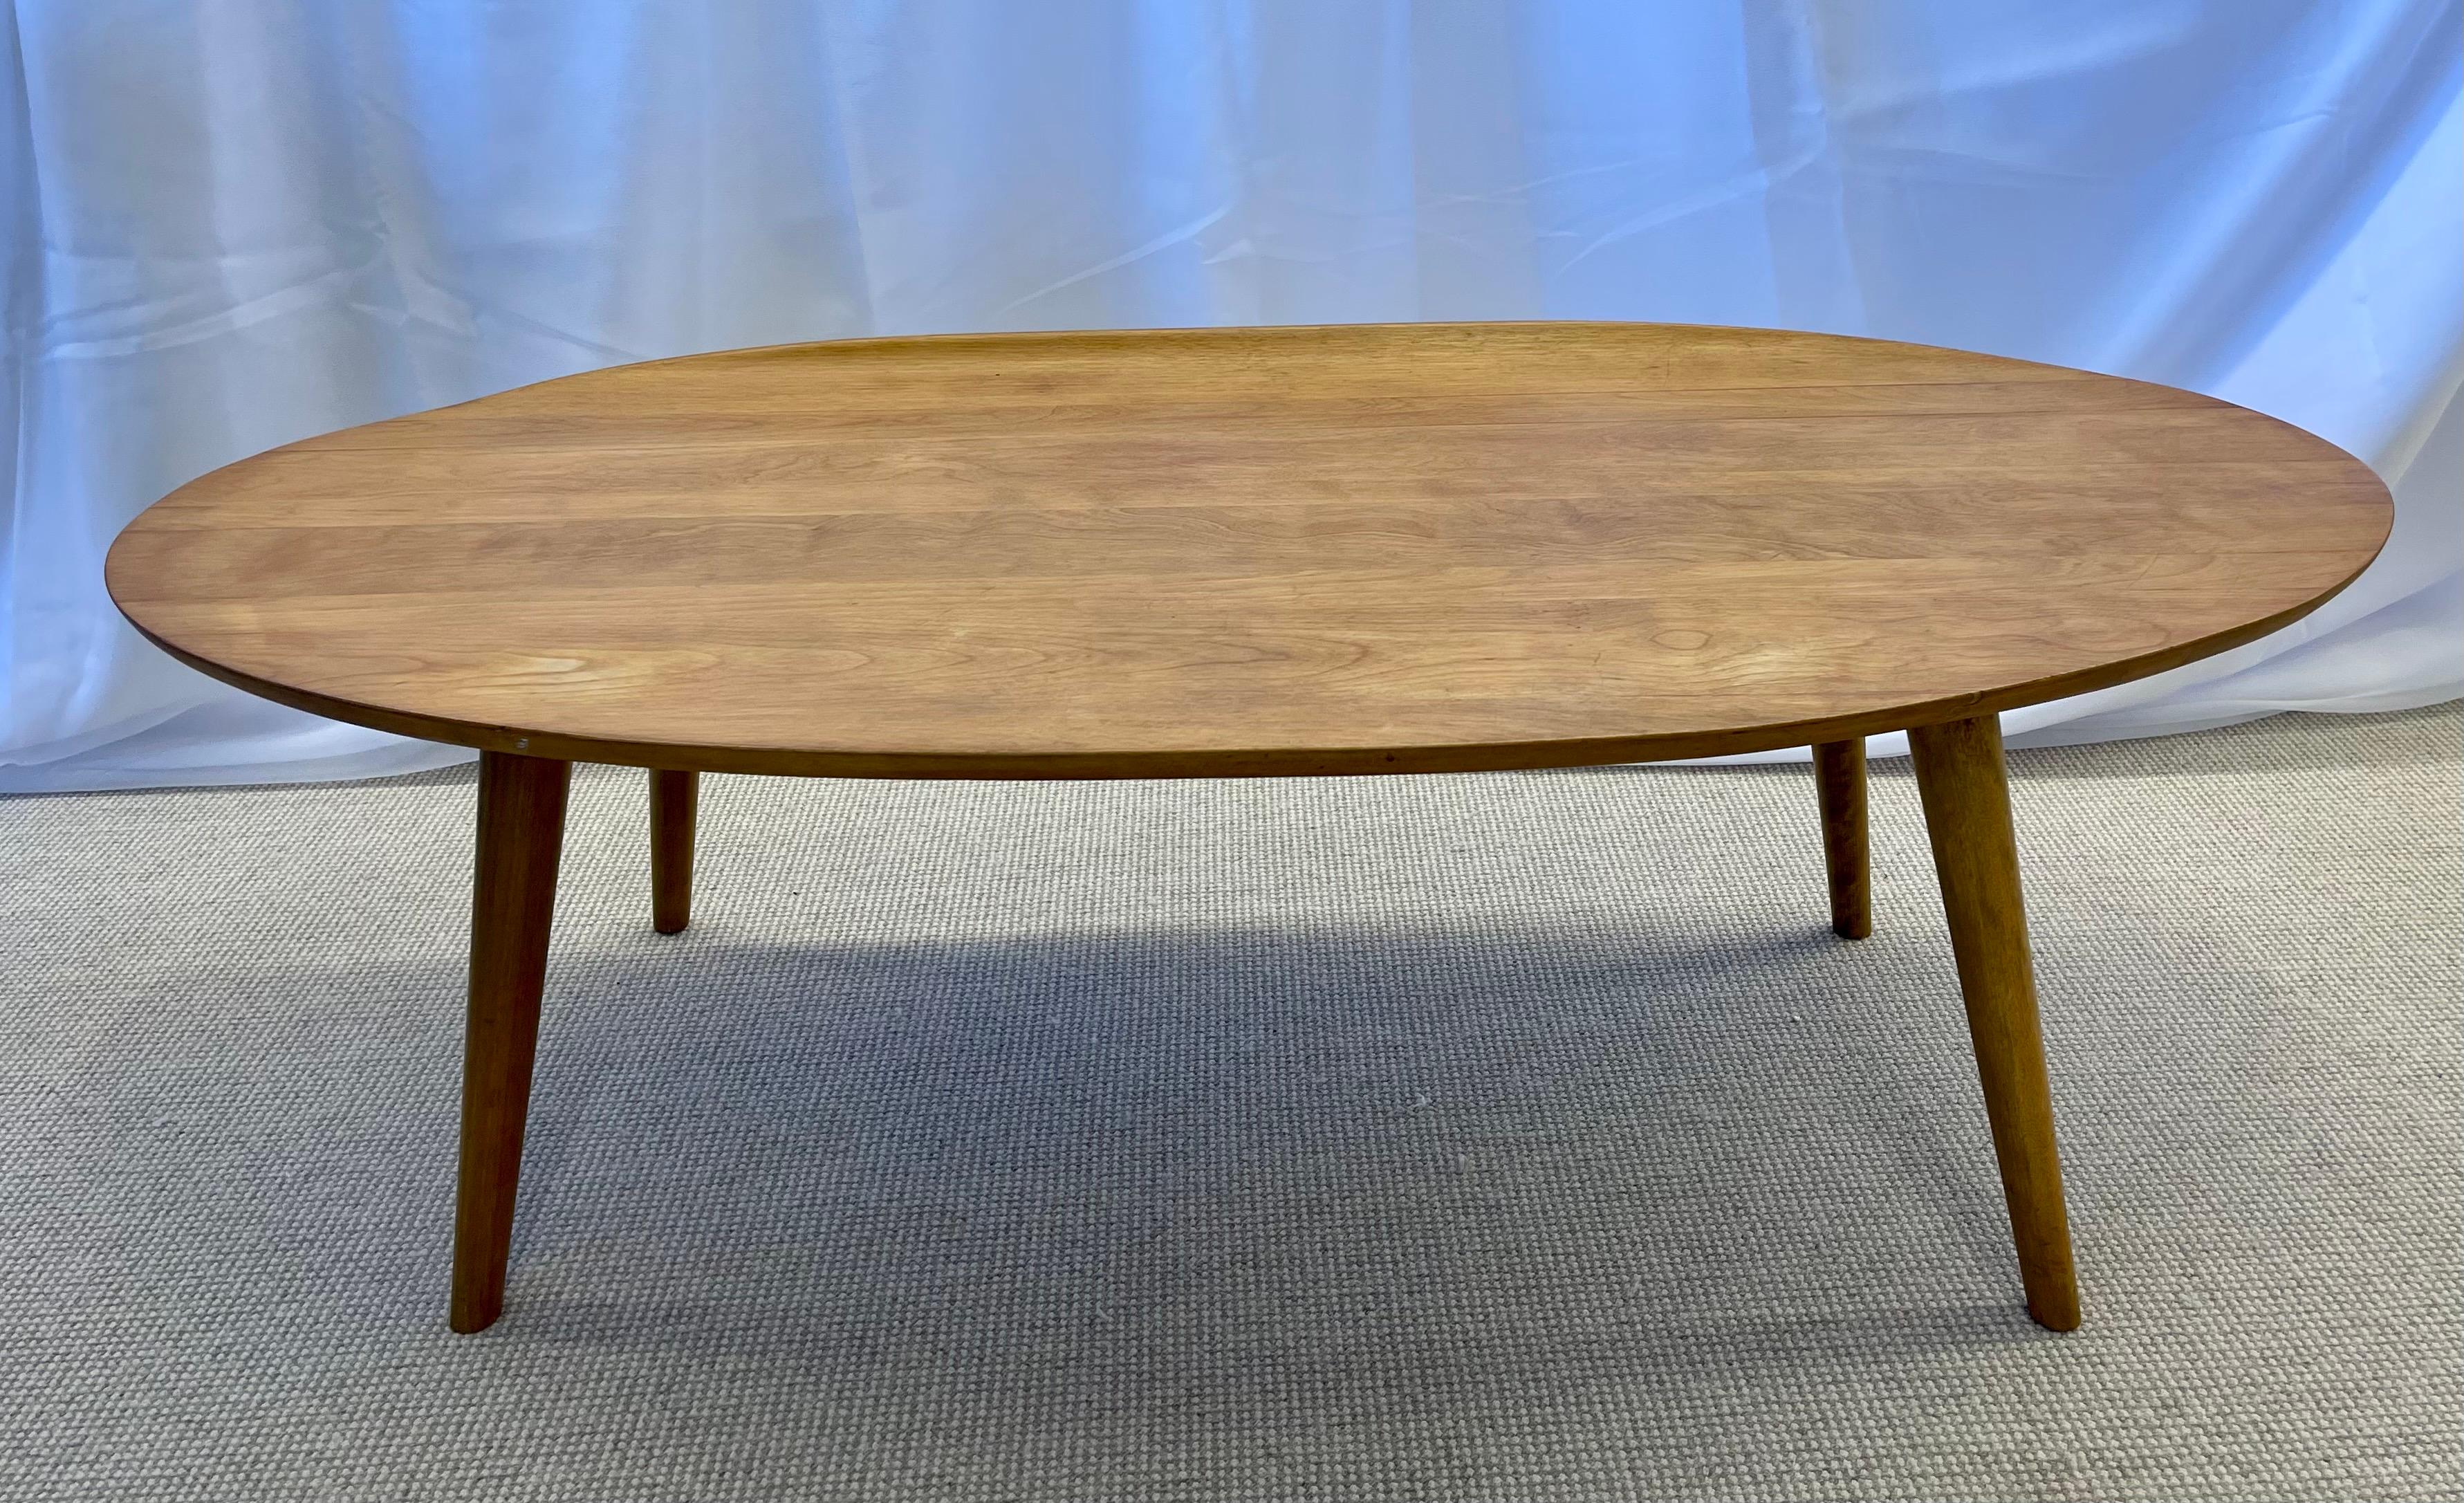 Mid-Century Modern Conant ball coffee table designed by Russel Wright. The Elliptical Coffee Table With Curled Edge is a sleek and stylish example of this designers work in a grained maple. USA, c. 1955 Impressed manufacturer's mark to underside